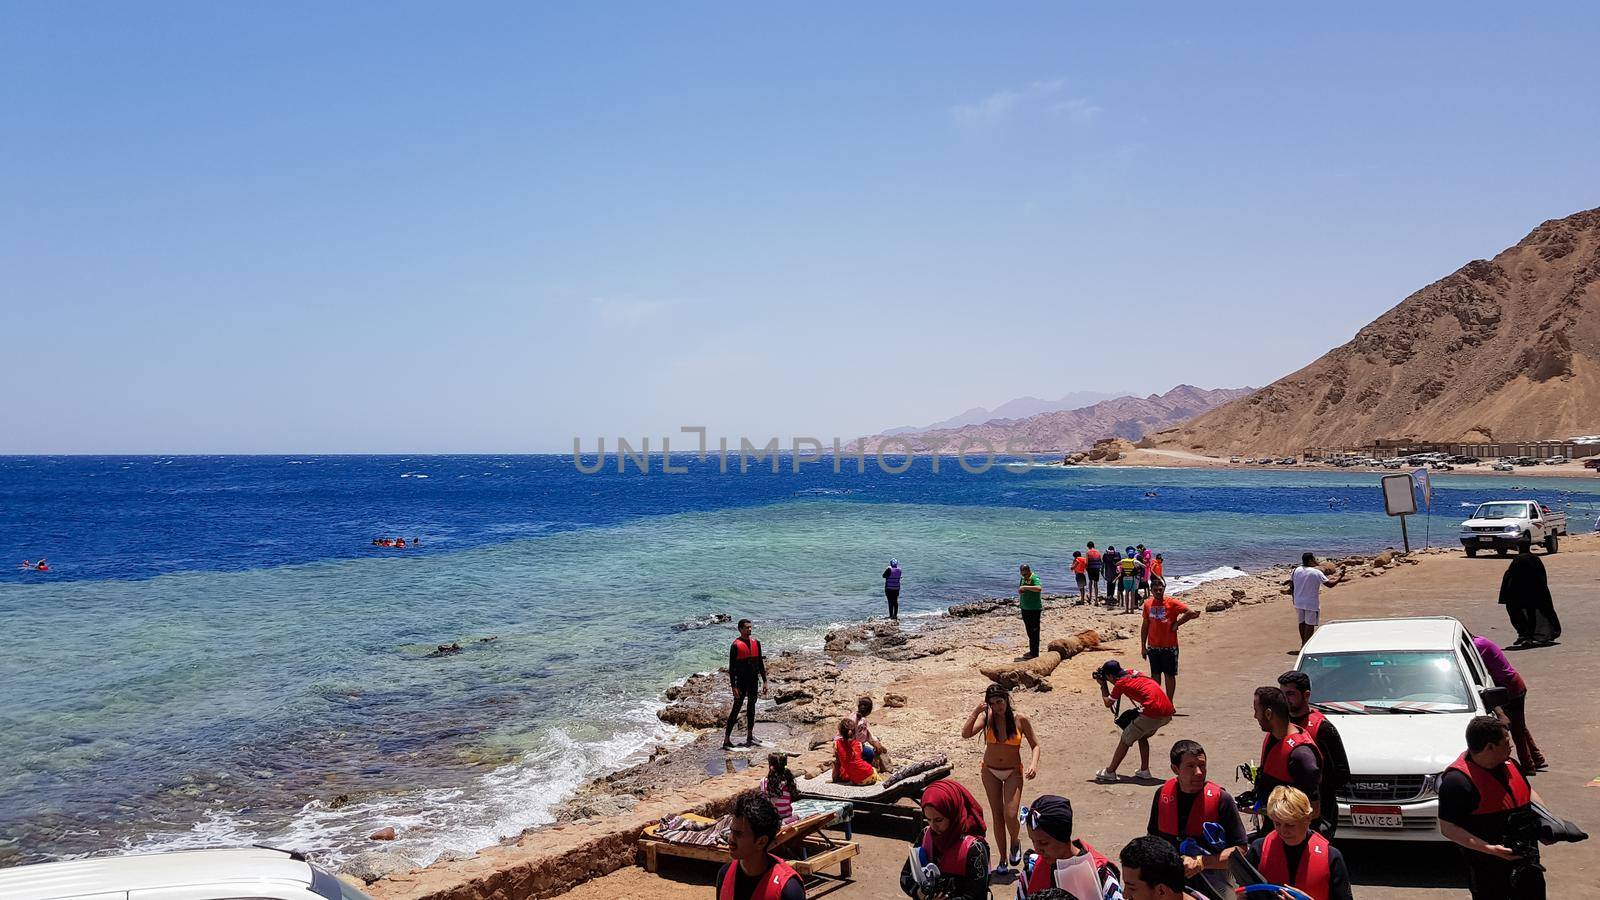 Egypt, Dahab - October 17, 2019: The Blue Hole is a popular diving spot in East Sinai. Sunny beach resort on the Red Sea in Dahab. A famous tourist destination near Sharm el Sheikh. Bright sunshine.